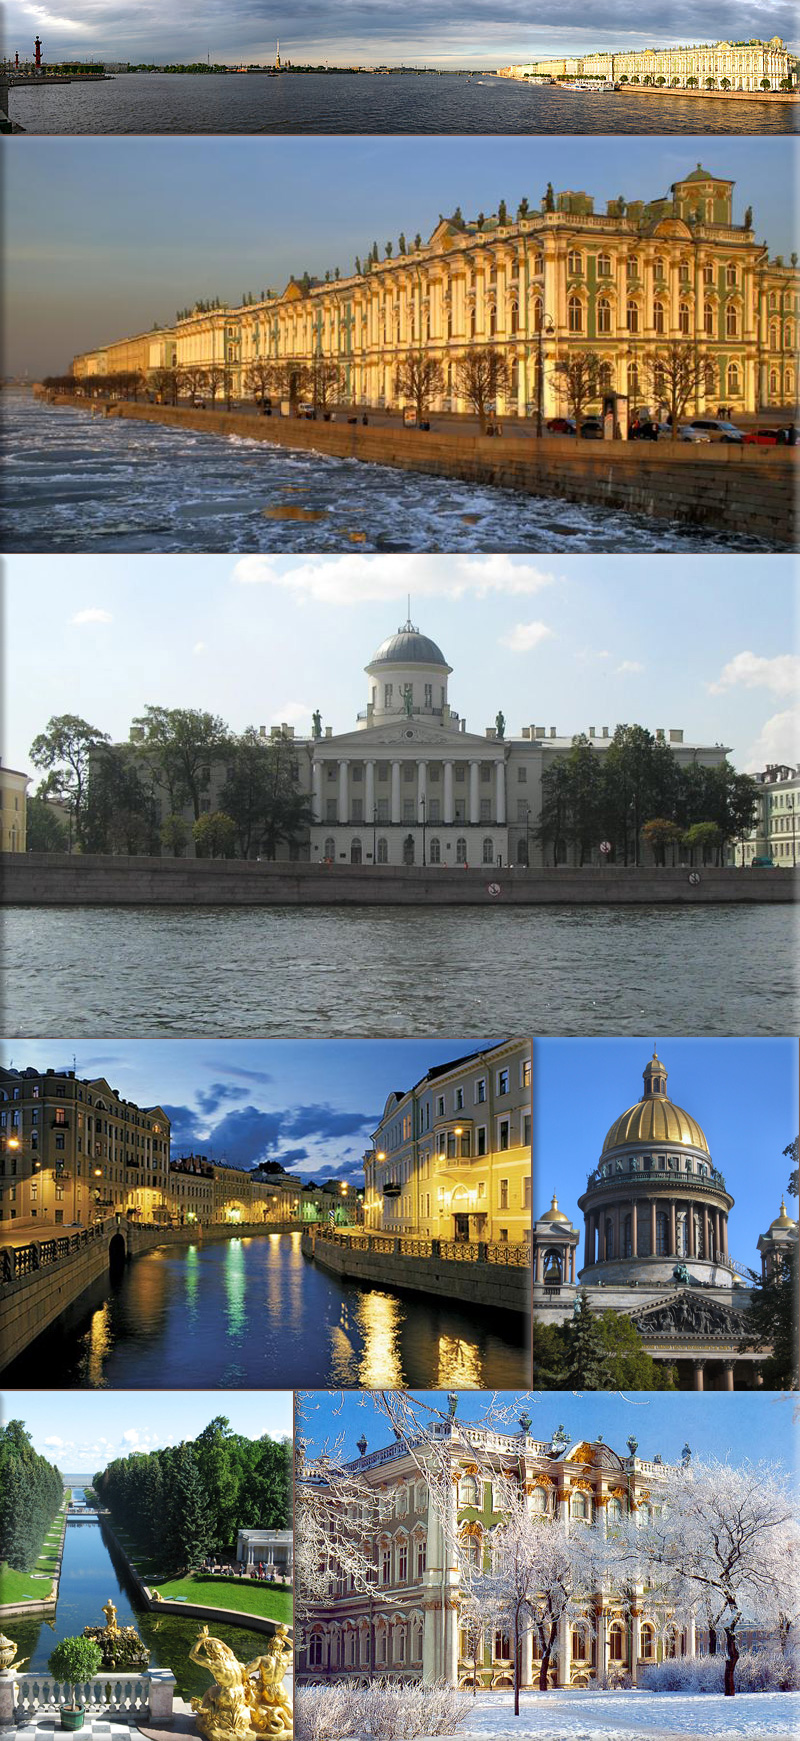 Saint Petersburg, Russia: a city and a federal subject (a federal city) of Russia located on the Neva River at the head of the Gulf of Finland on the Baltic Sea